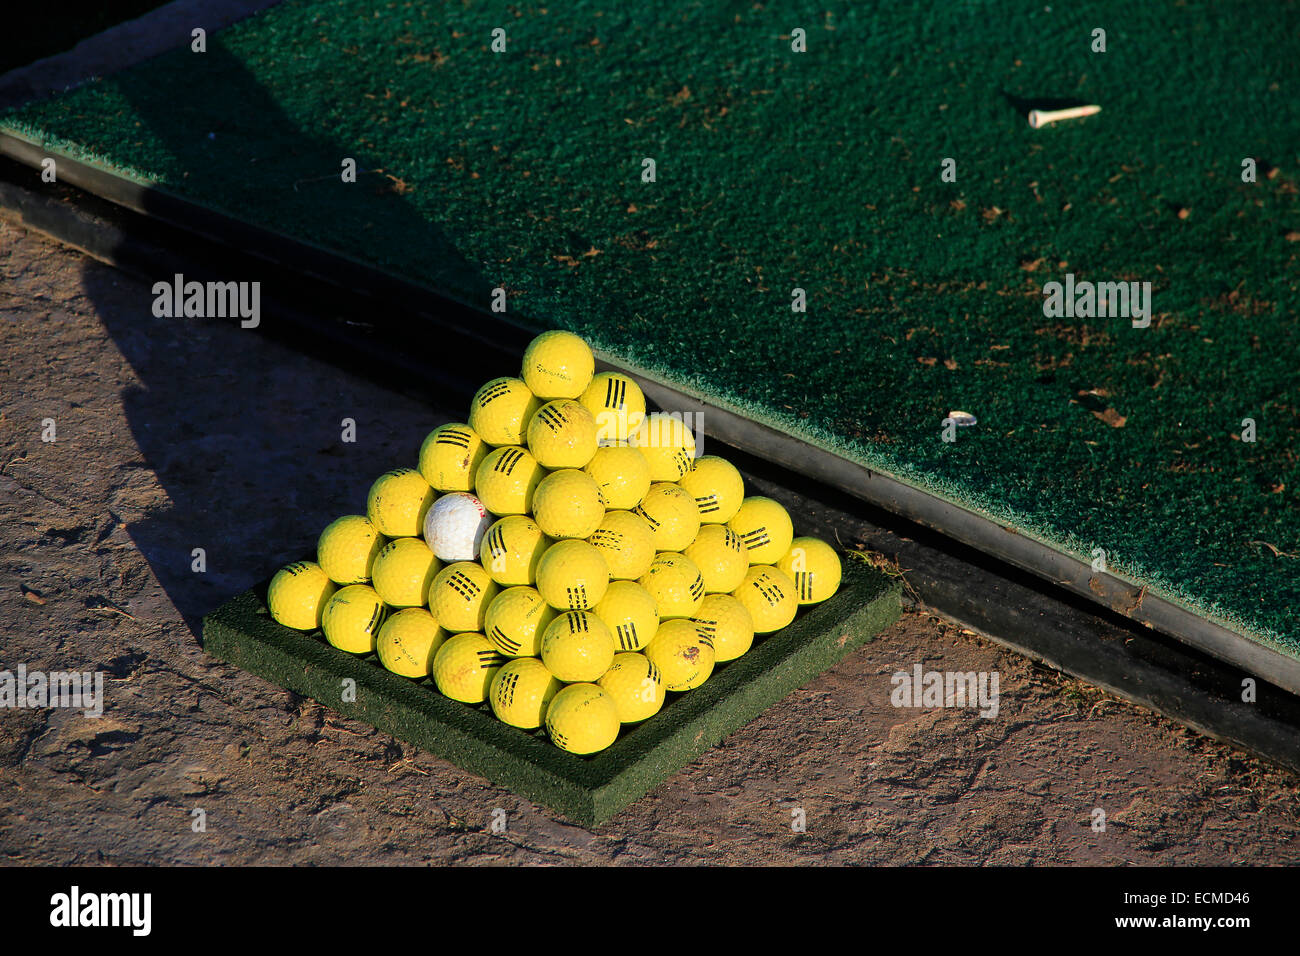 Tropical golf driving range with golf balls stacked in pyramids. Stock Photo